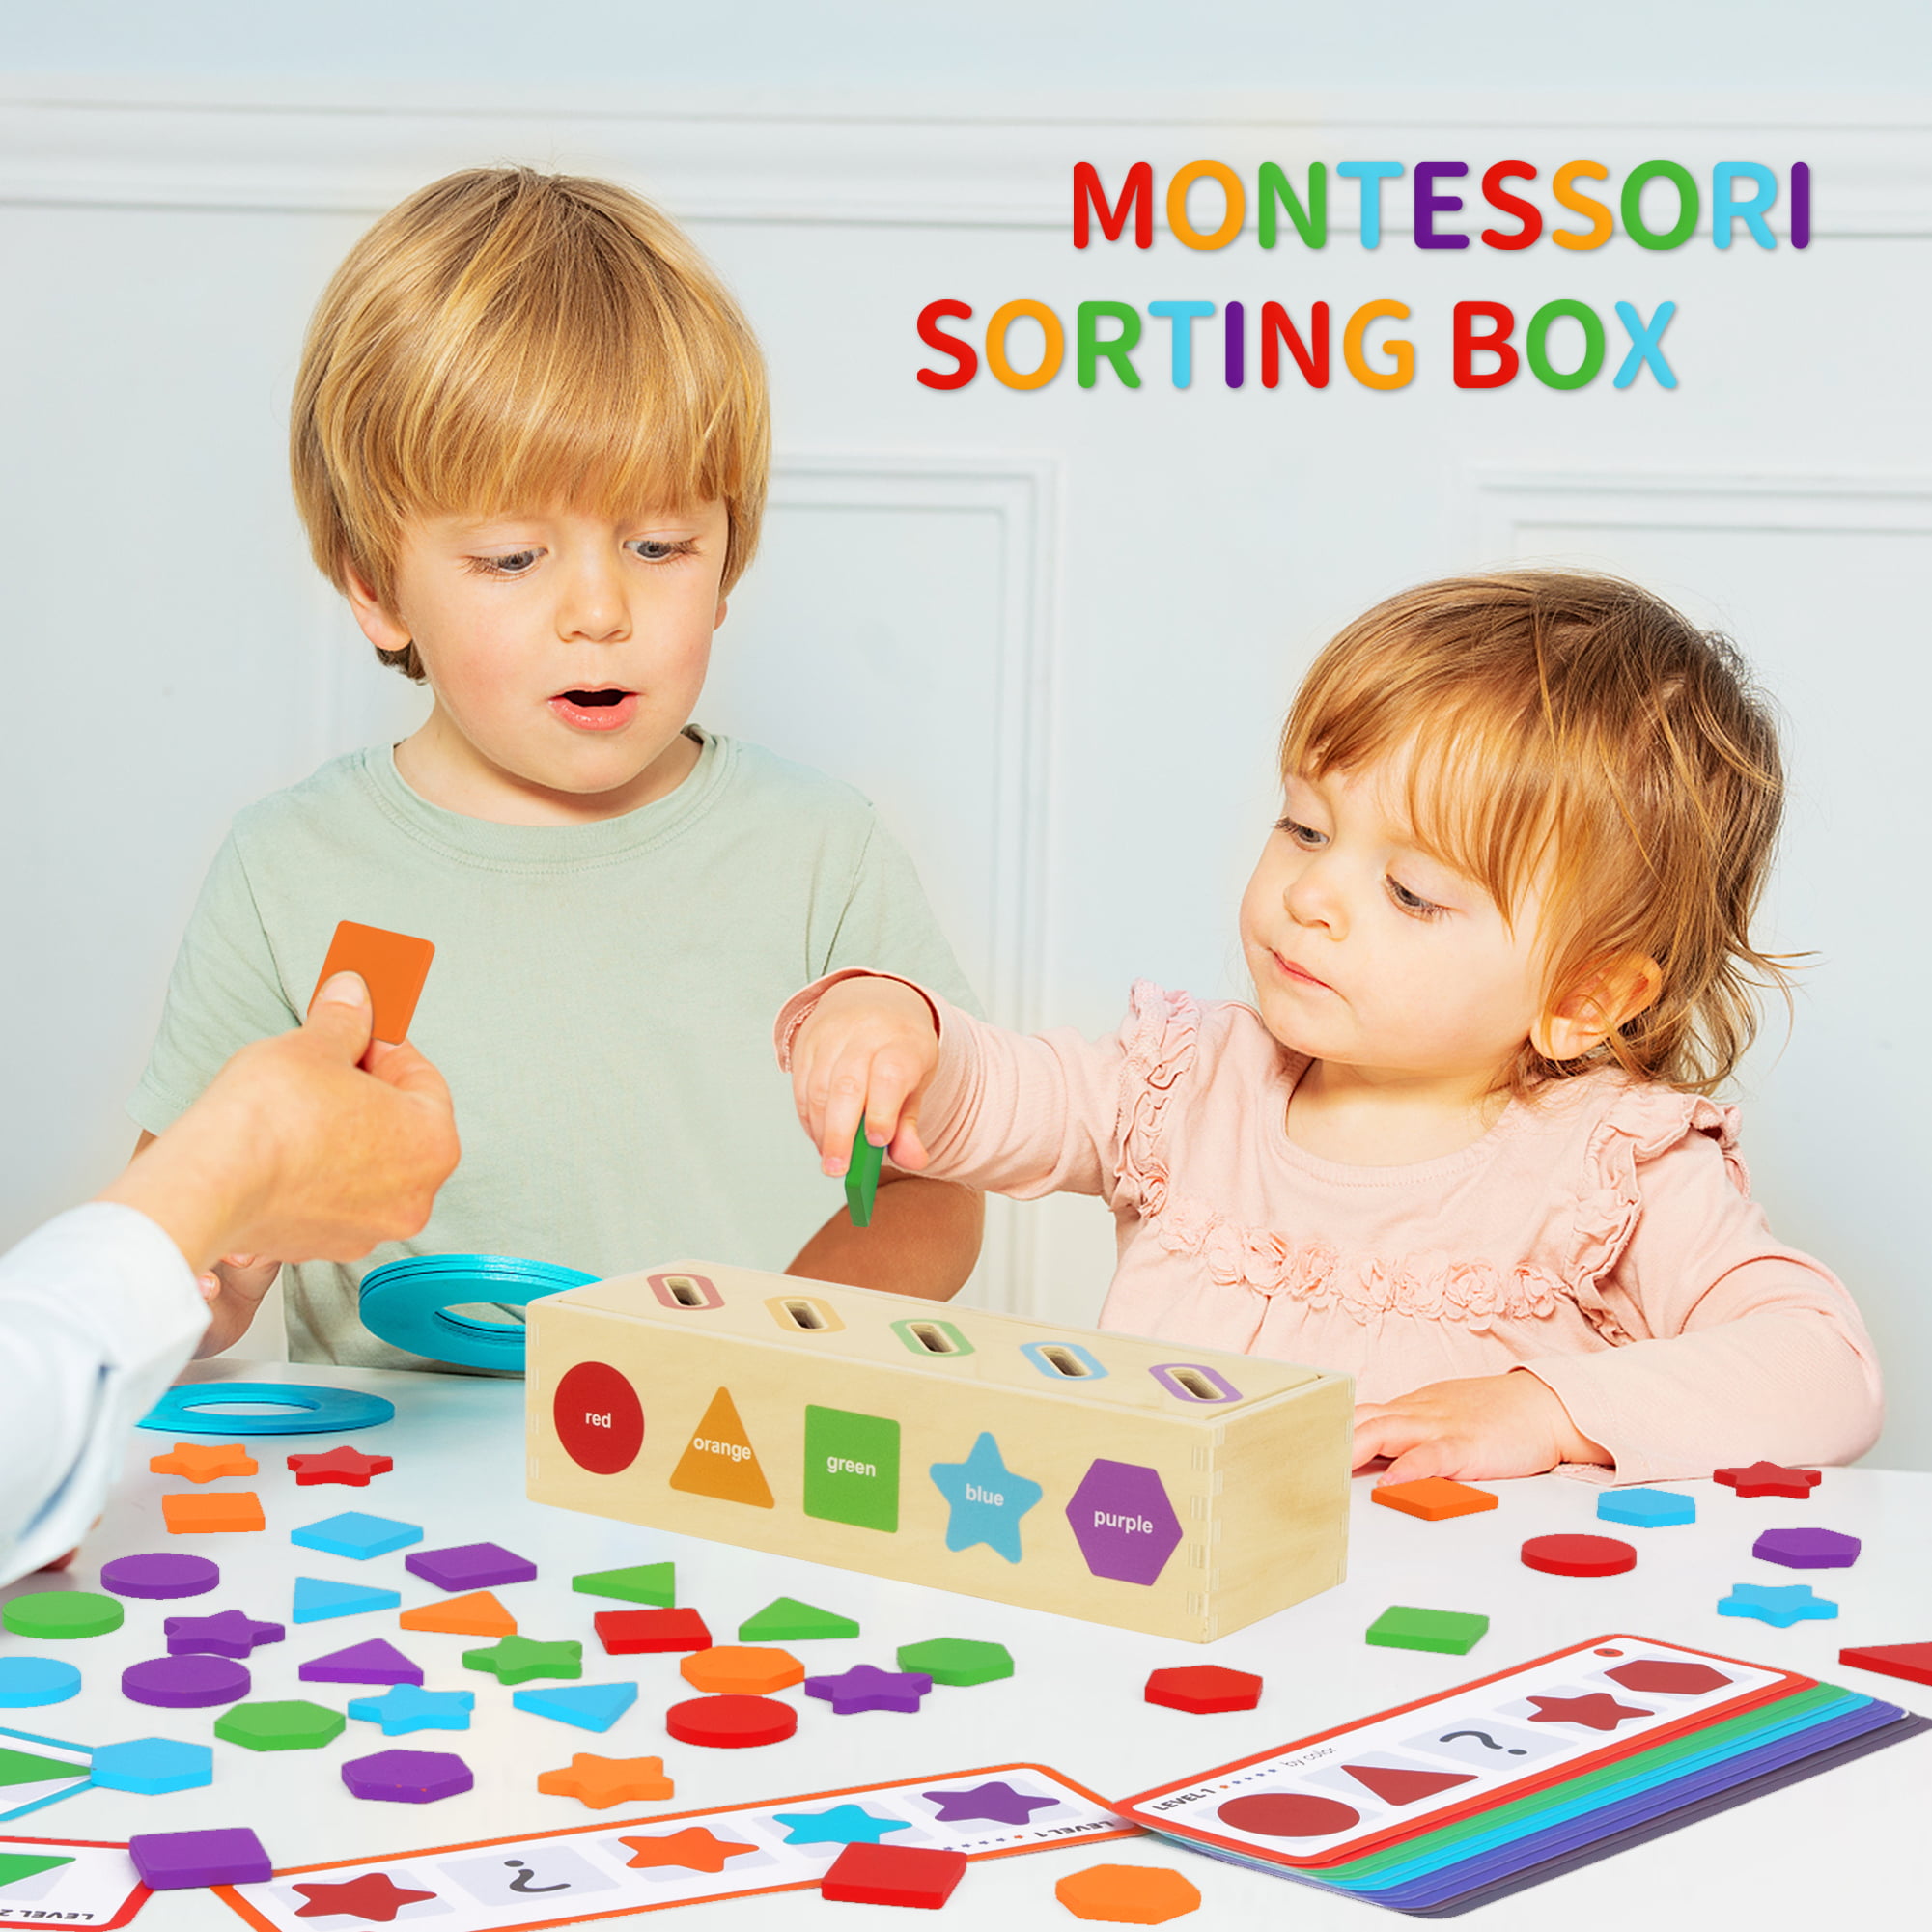 Montessori Wooden Color Sorting Toys - Sensory Toys Matching Game with  Sorting Bowls - Preschool Learning Educational Toddler Toys for 3+ Year Old  Boy and Girl Gifts - Yahoo Shopping